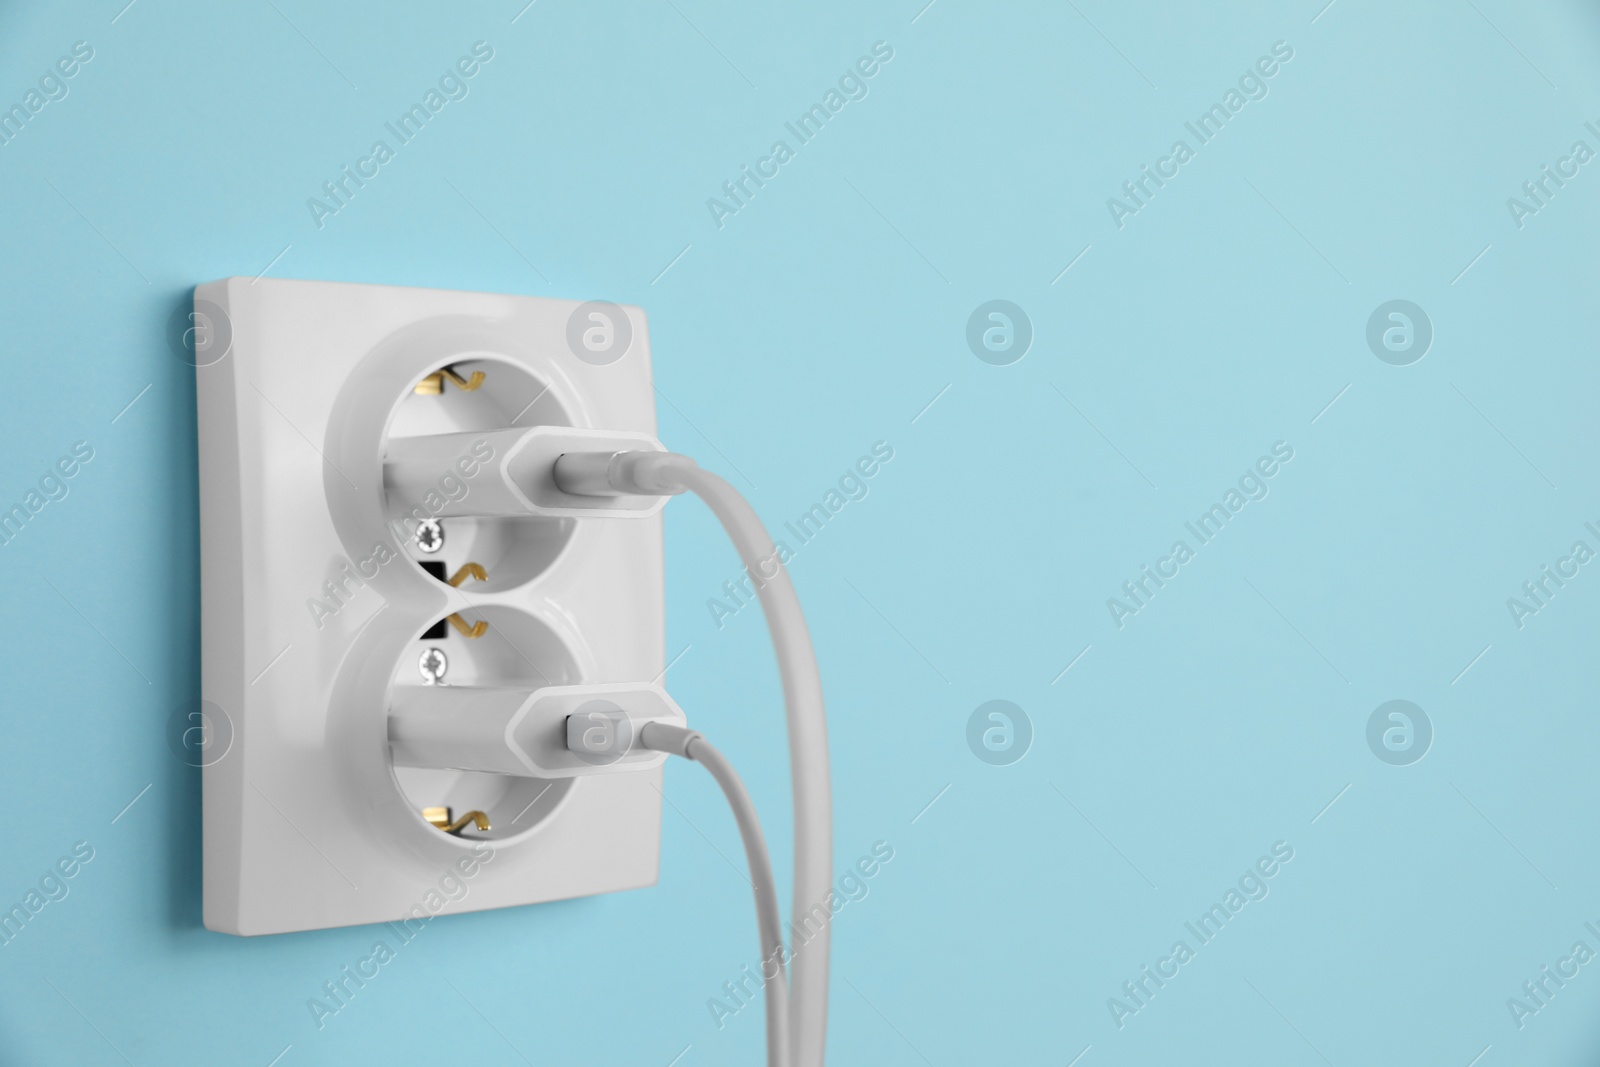 Photo of Charger adapters plugged into power sockets on light blue wall, space for text. Electrical supply